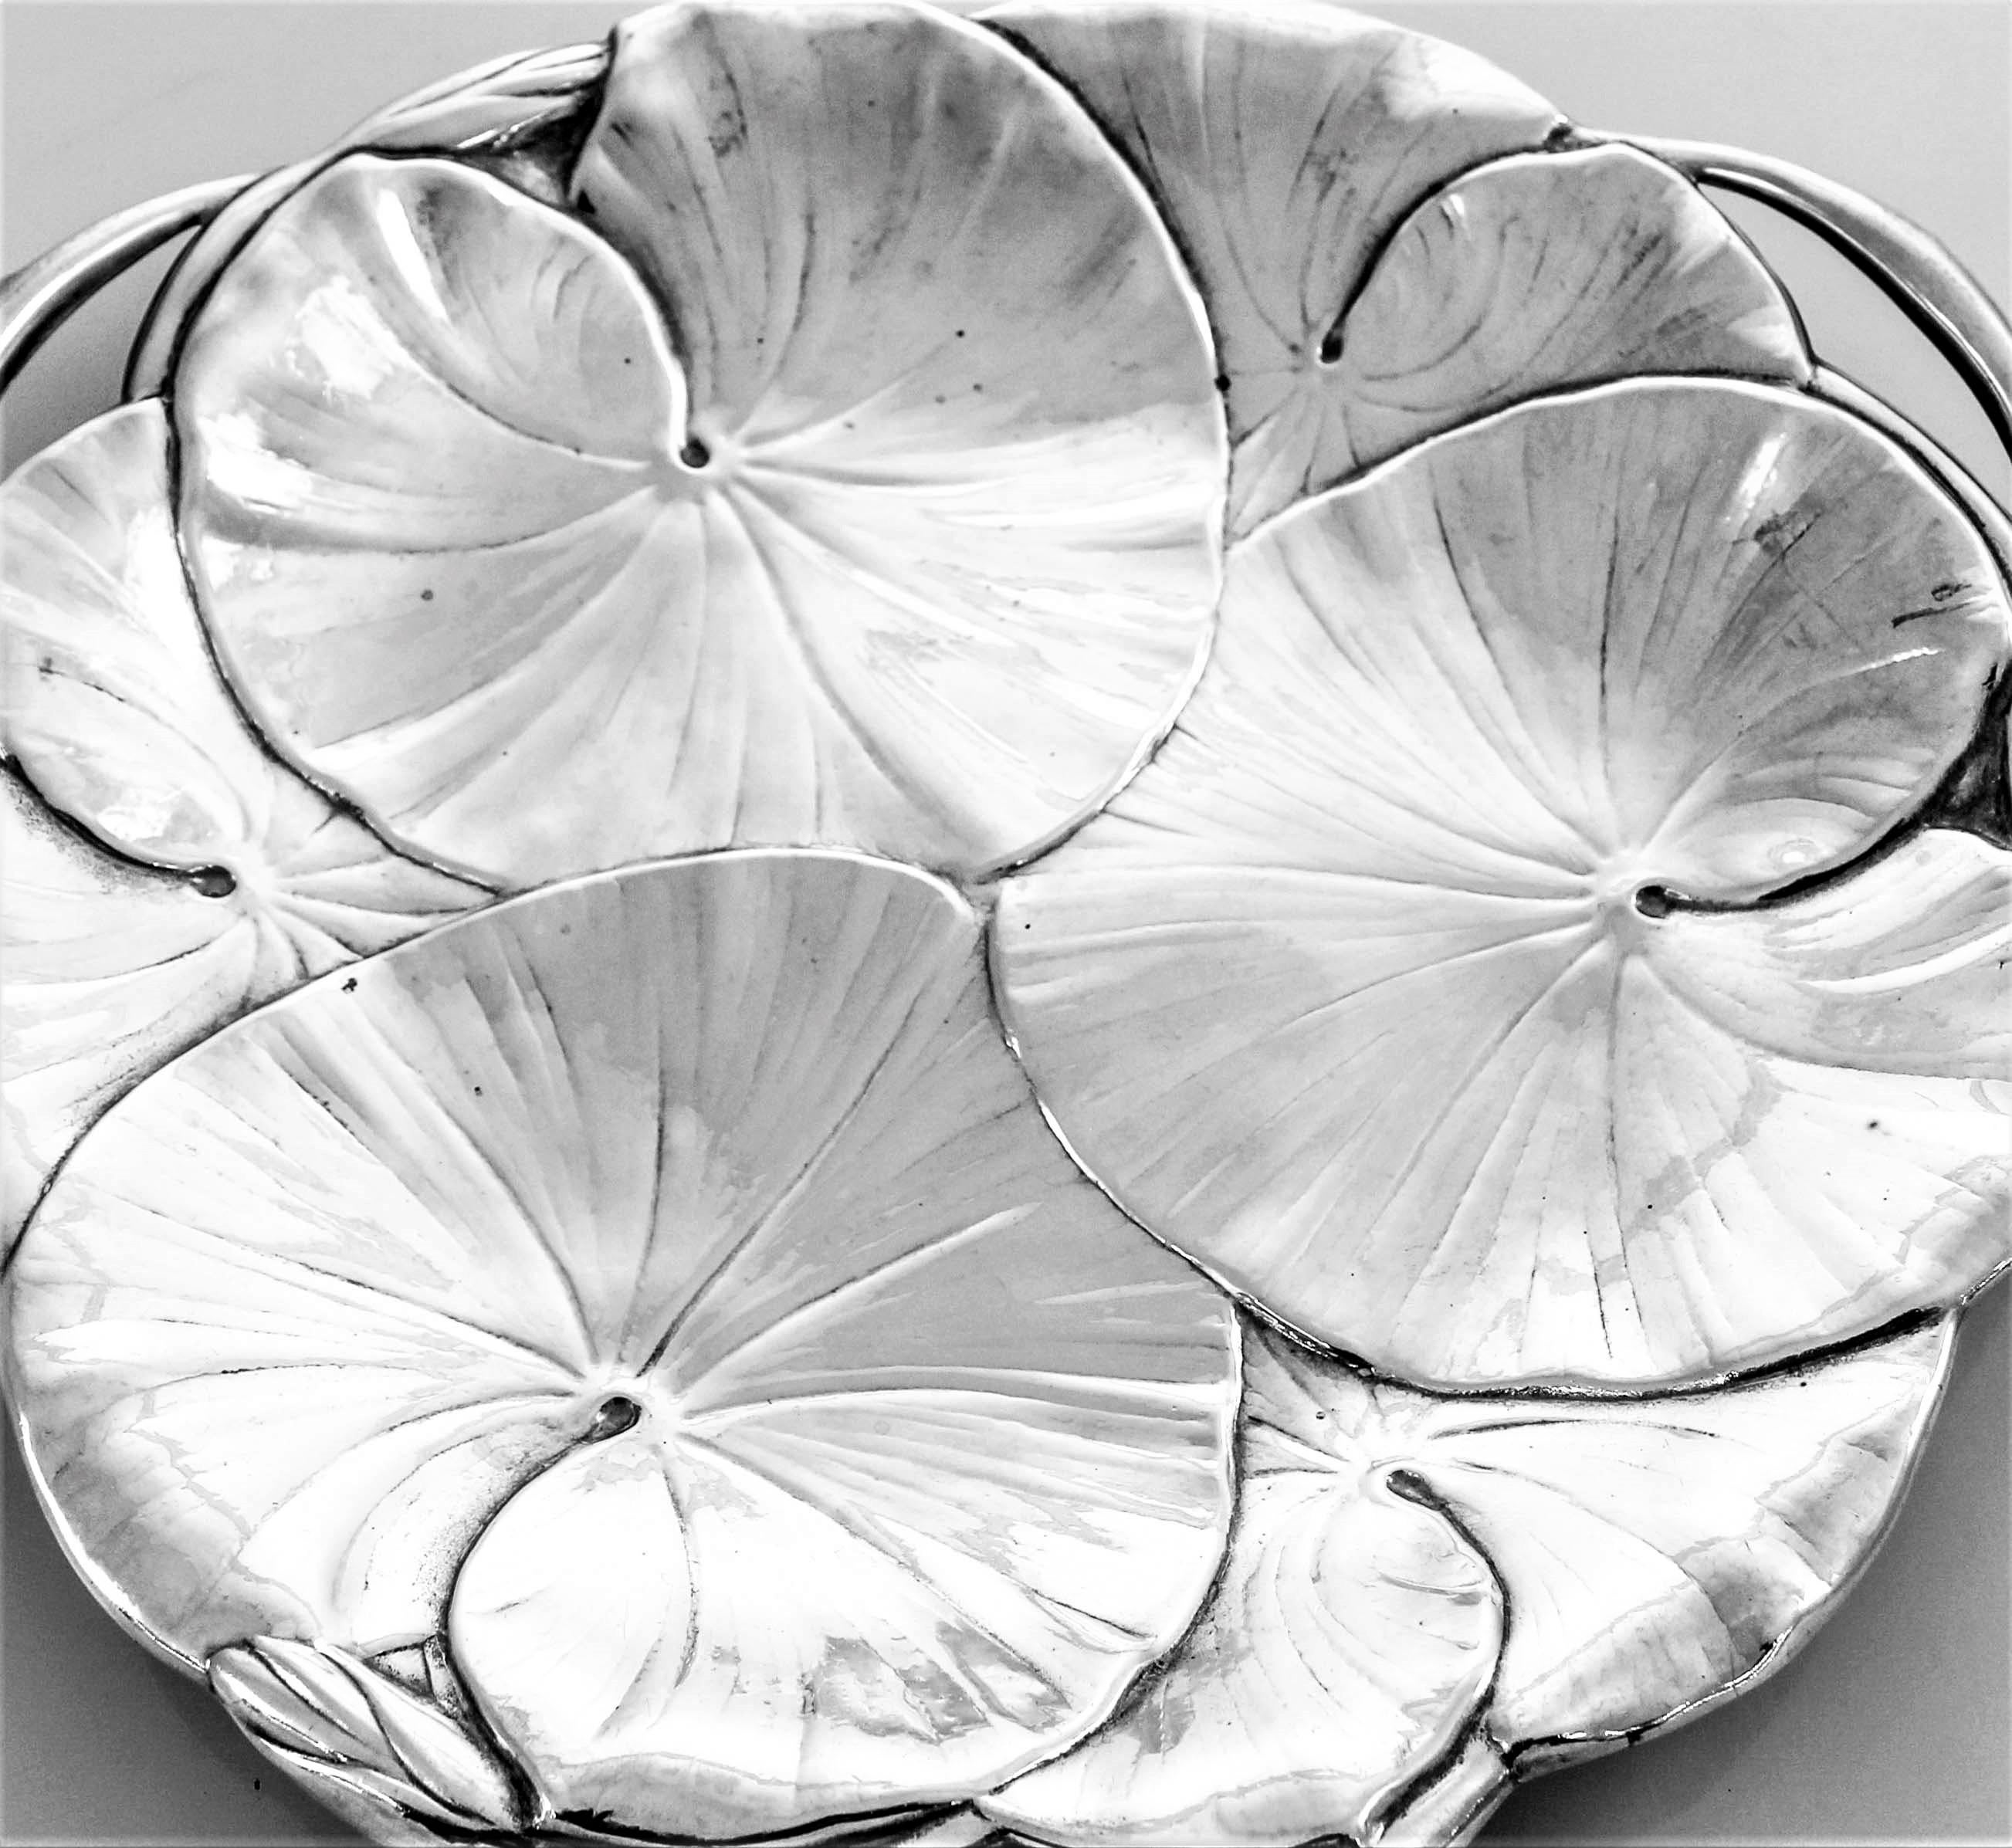 Three large lily pads make up the top of this sterling Art Nouveau dish. The Art Nouveau style was inspired by natural forms and structures, particularly the curved lines of plants and flowers. It has three cutouts along the edge as handles. Handles